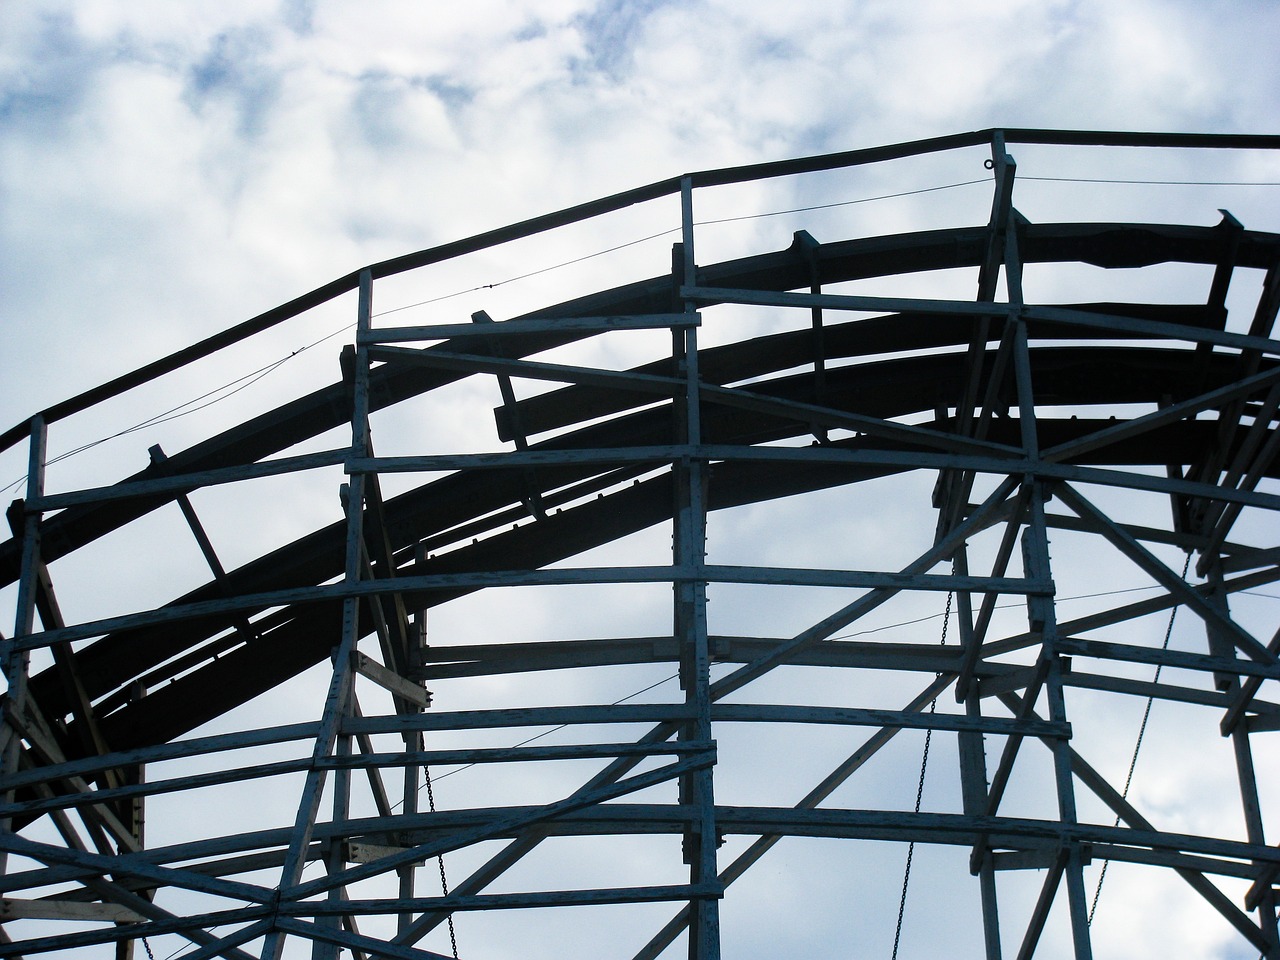 a roller coaster against a cloudy blue sky, by Edward Corbett, flickr, under repairs, detail, raven, rounded lines